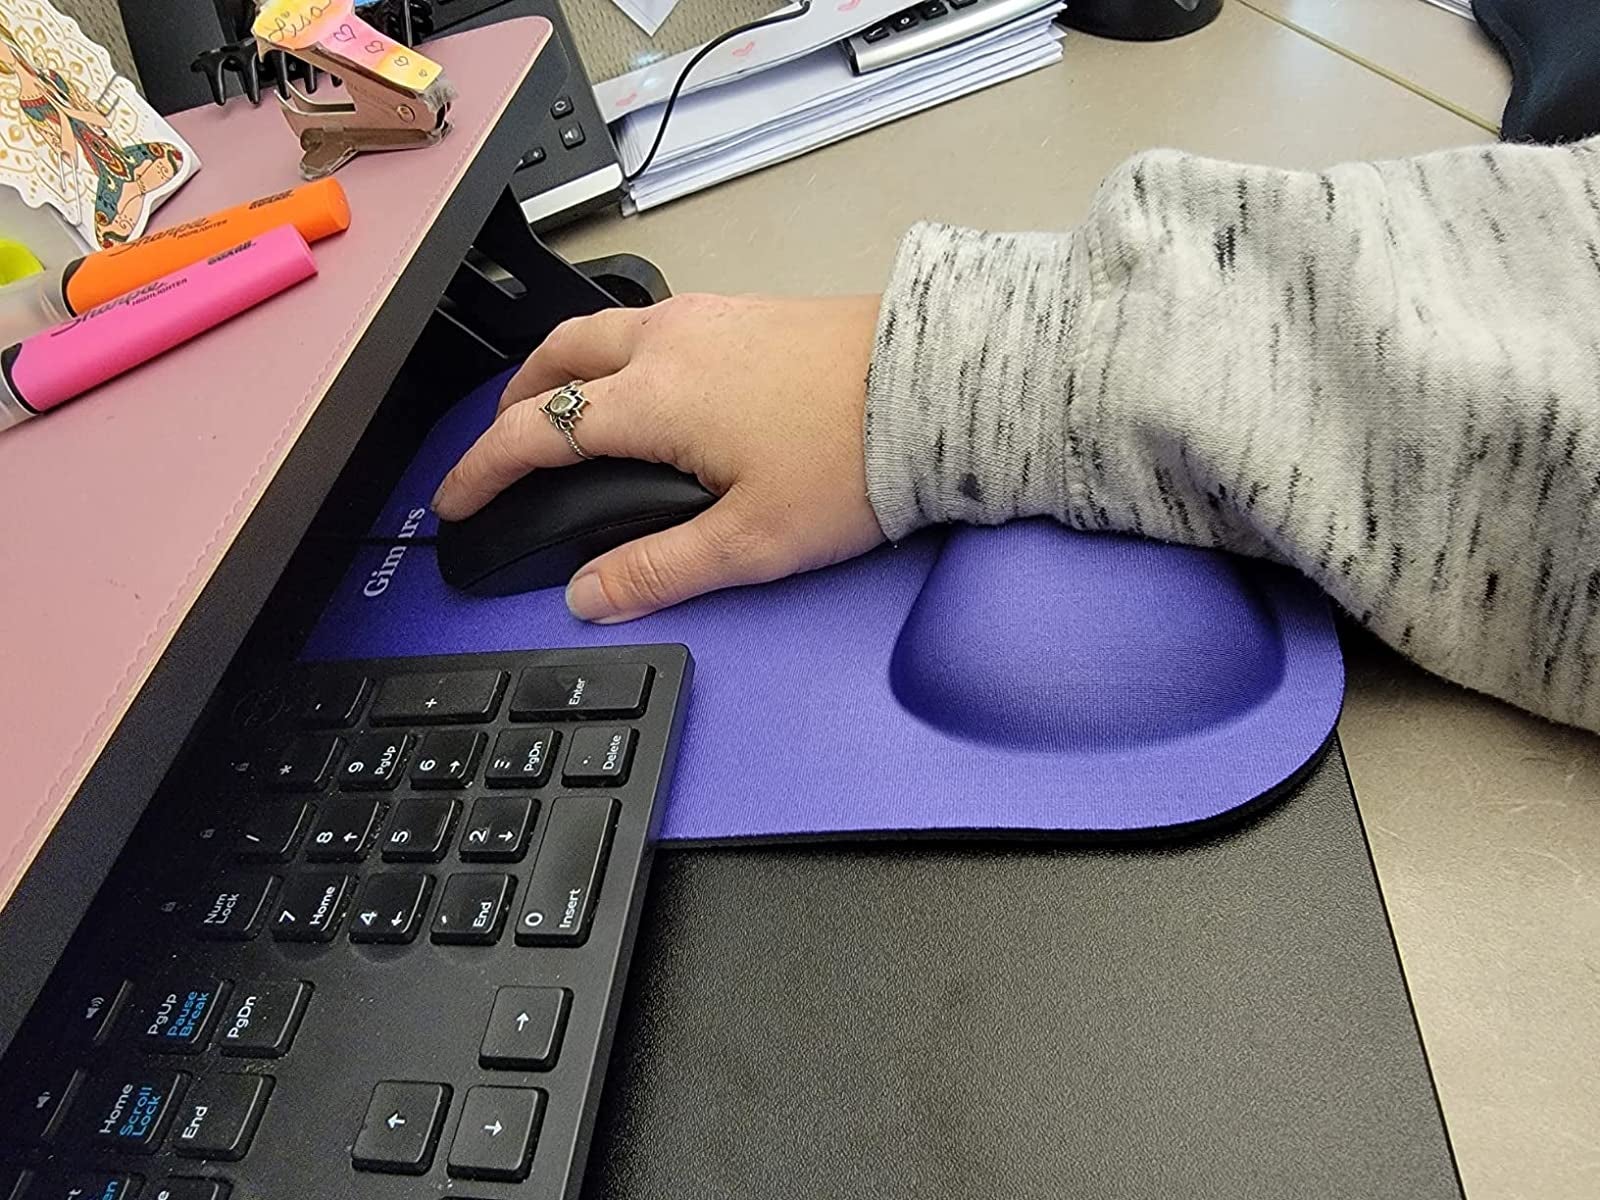 Ergonomic Mouse Pad with Wrist Support - Protect Your Wrists - Memory Foam Mousepad with Wrist Rest - Pain Relief Mouse Pad with Non-Slip Rubber Base